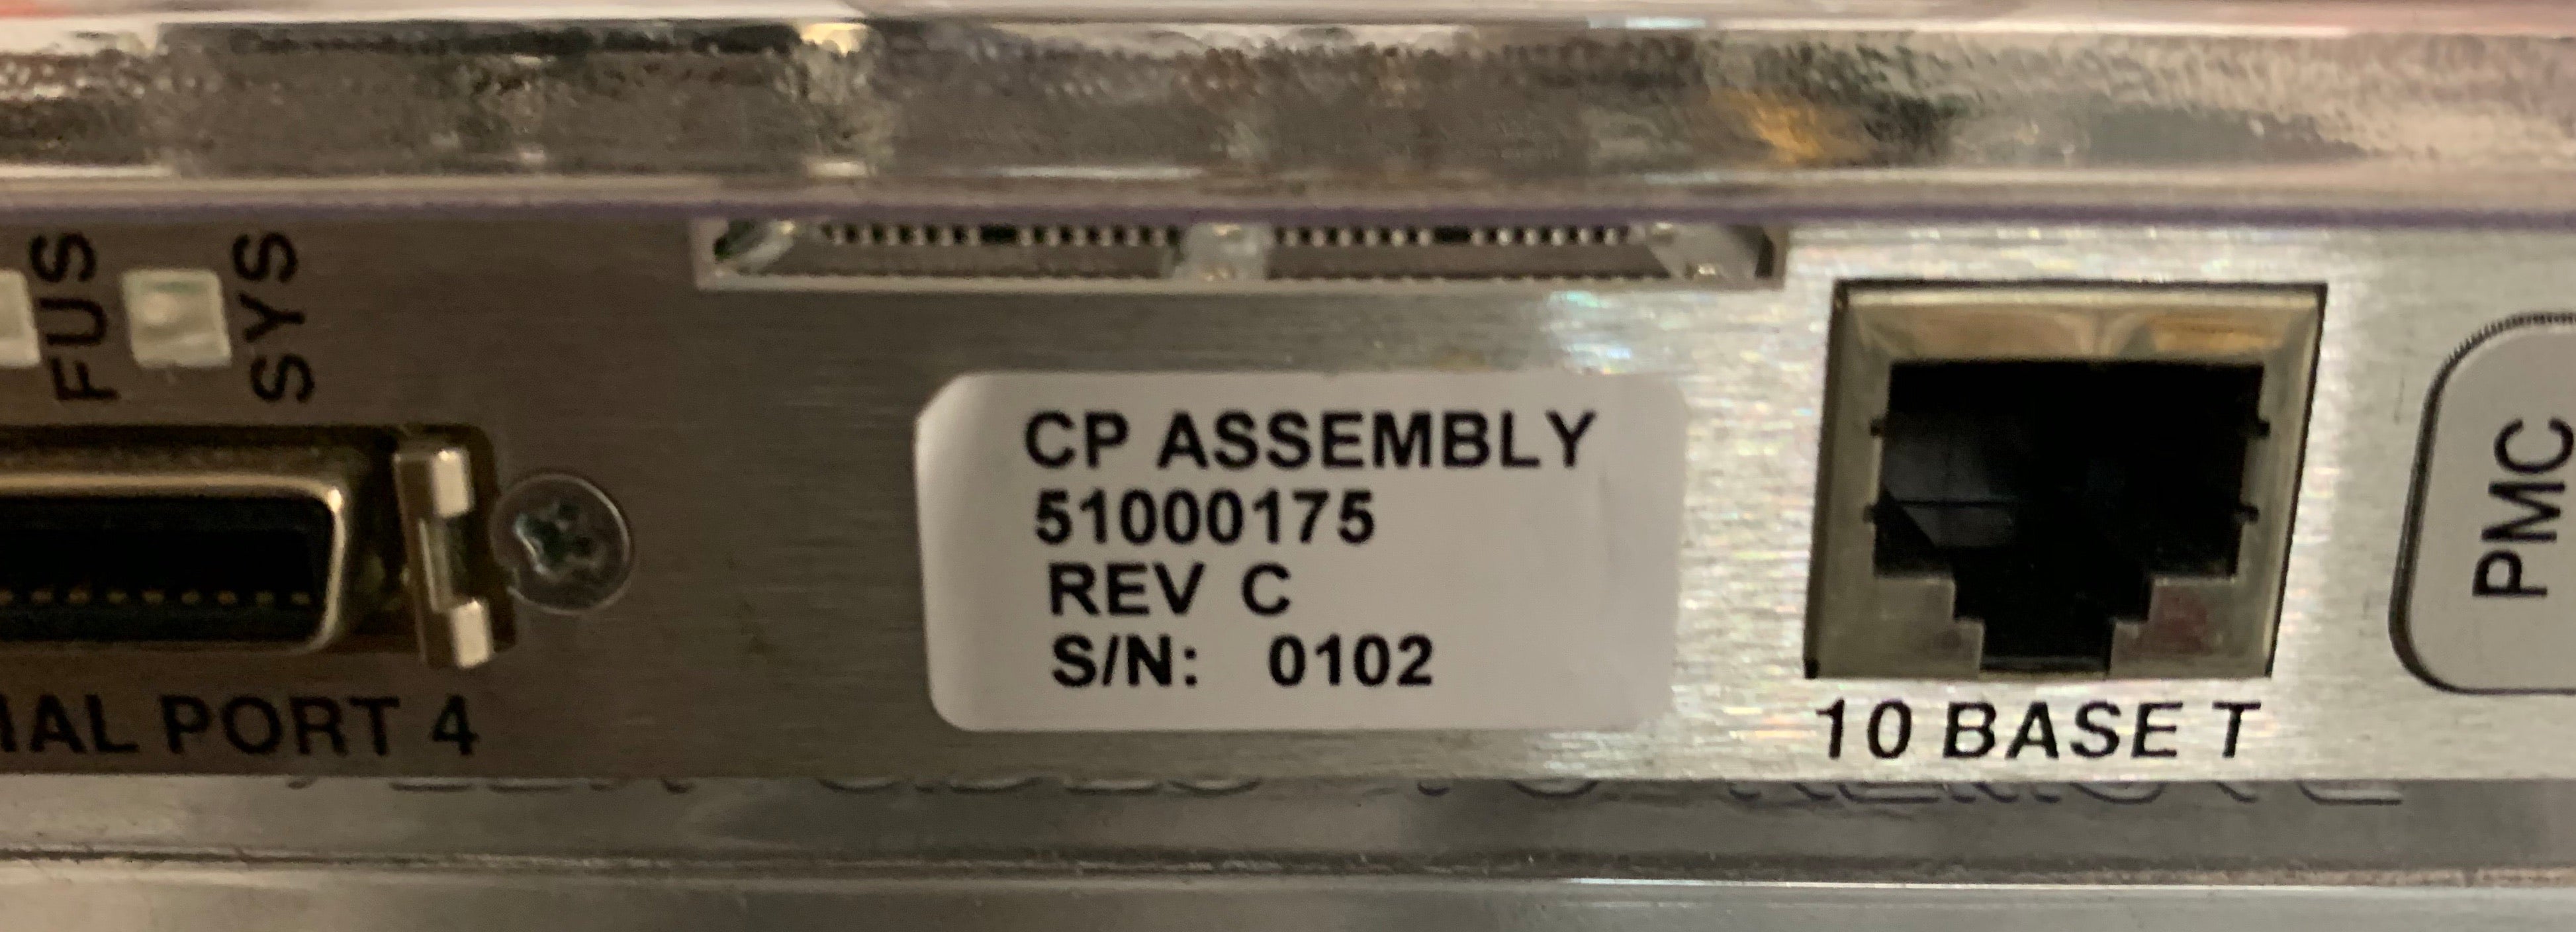 51000175 CP ASSEMBLY BOARD 453566497751